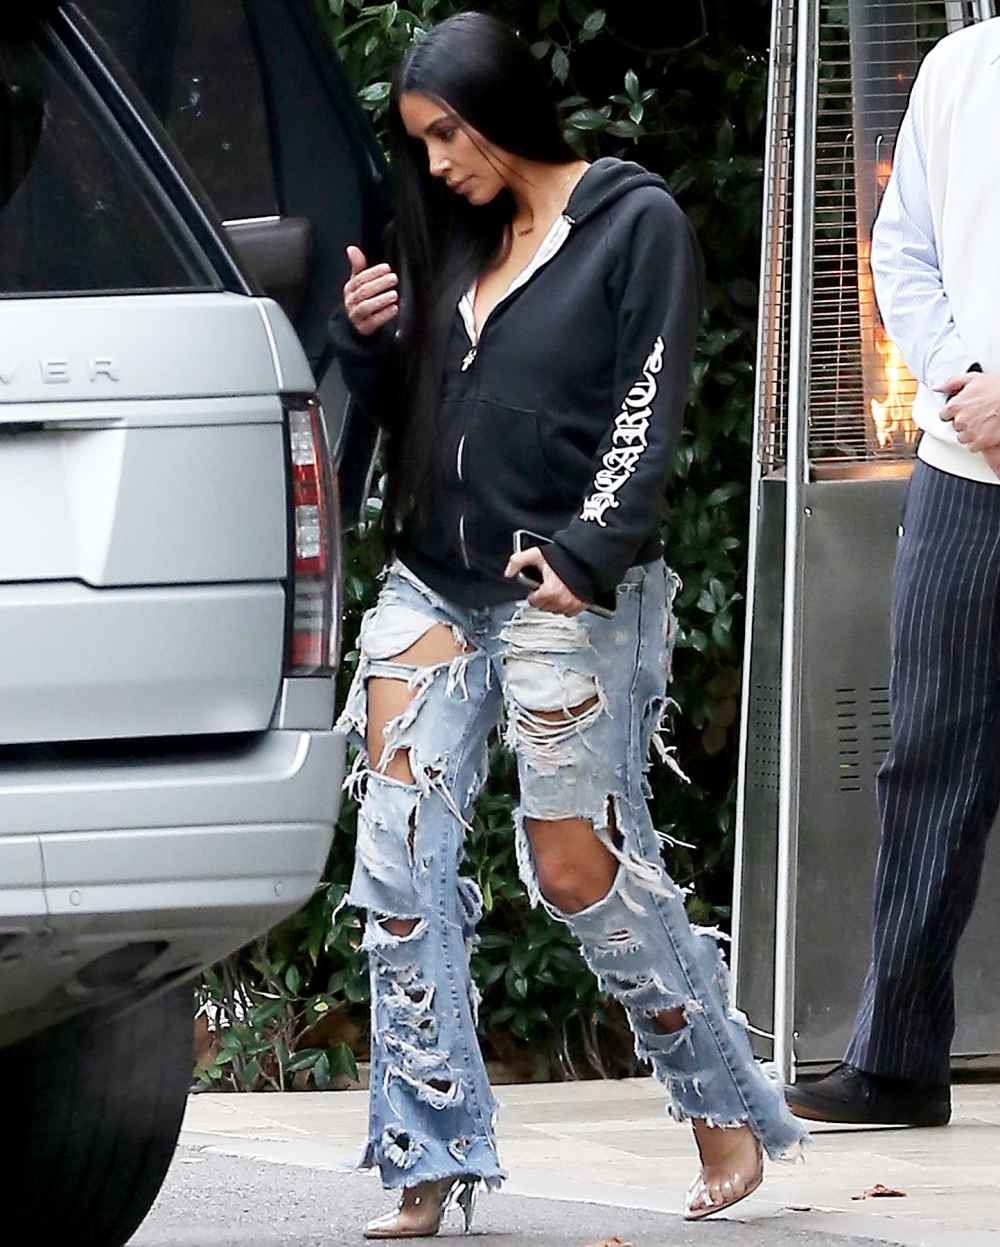 Kim Kardashian is spotted out and about in Bel Air, California with friends on January 4, 2017.